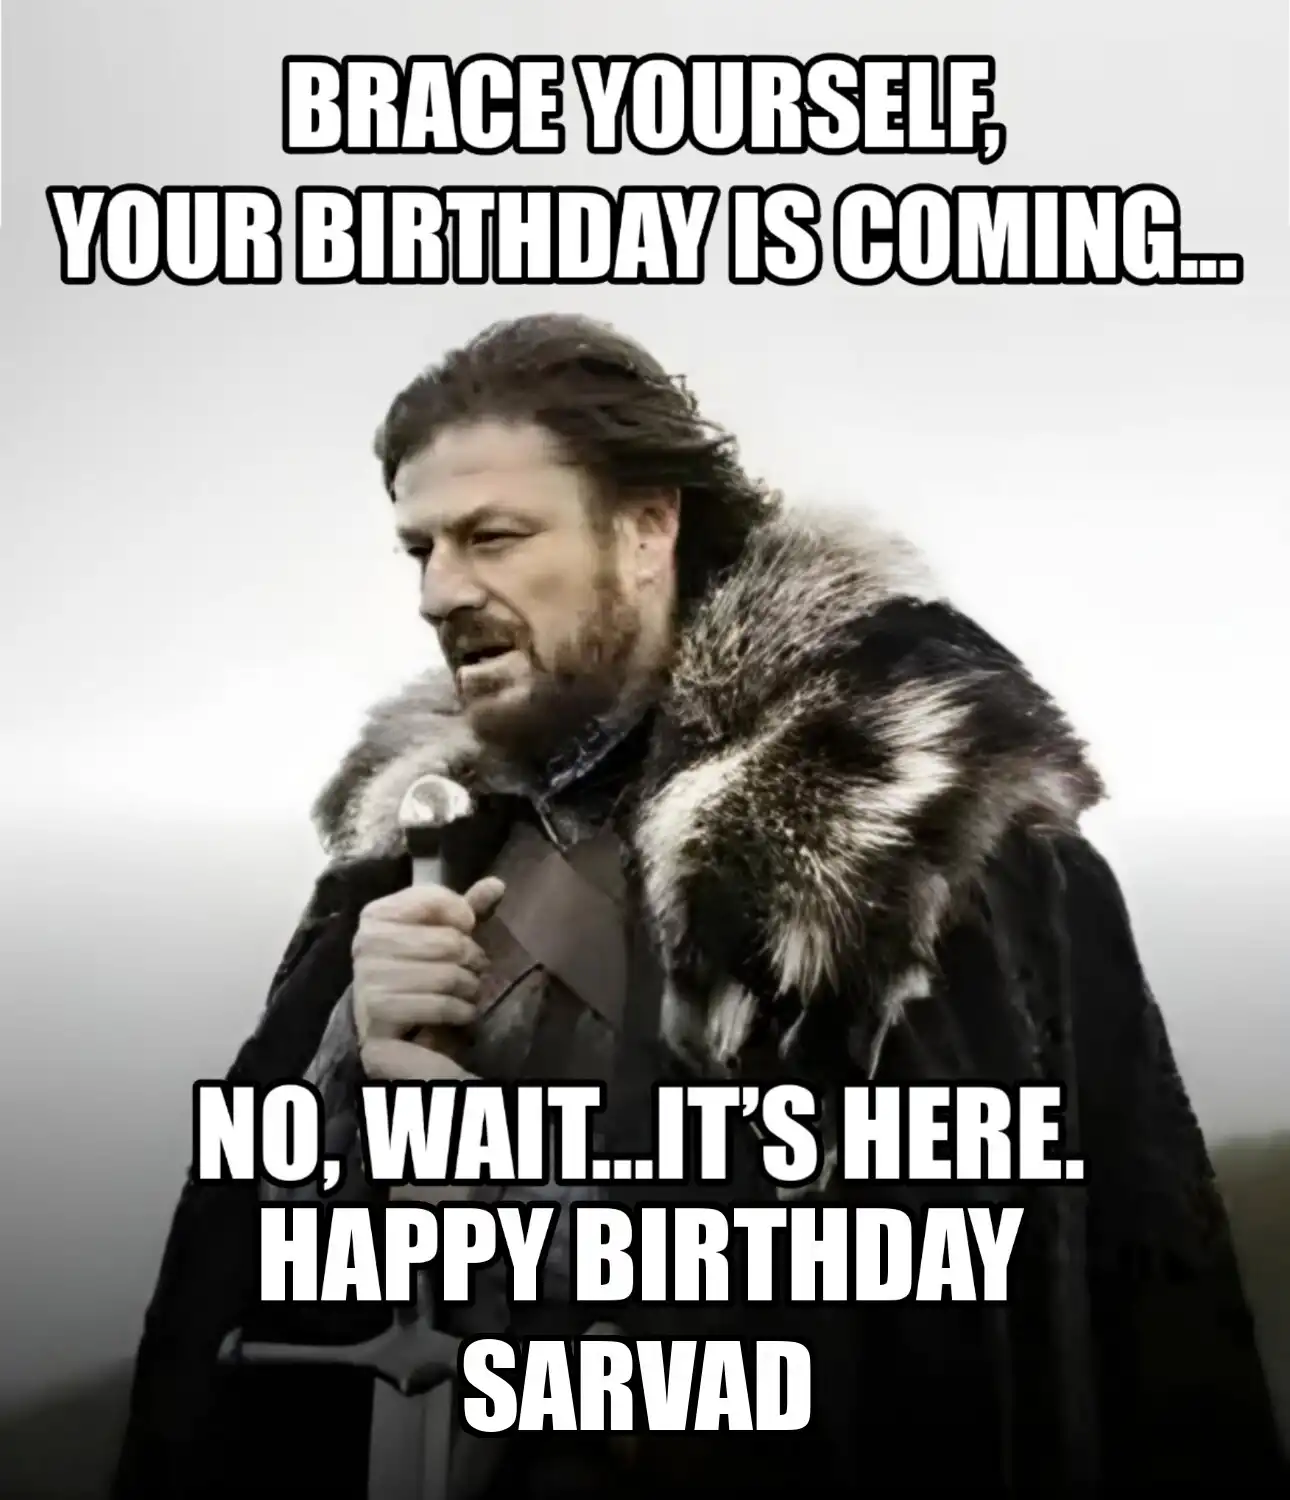 Happy Birthday Sarvad Brace Yourself Your Birthday Is Coming Meme